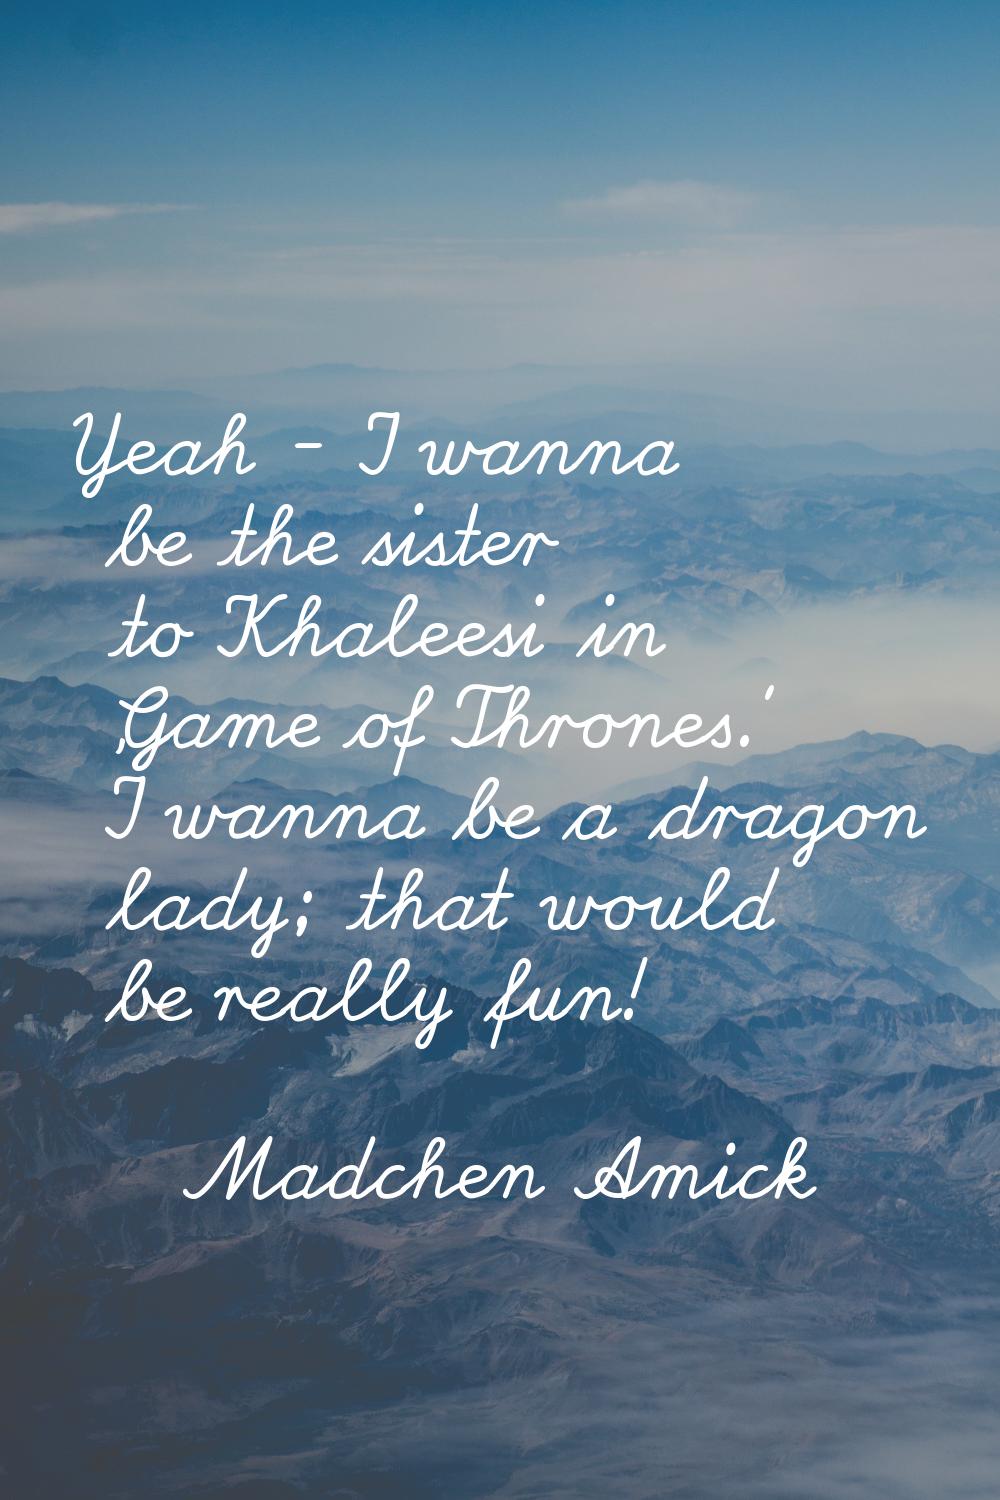 Yeah - I wanna be the sister to Khaleesi in 'Game of Thrones.' I wanna be a dragon lady; that would